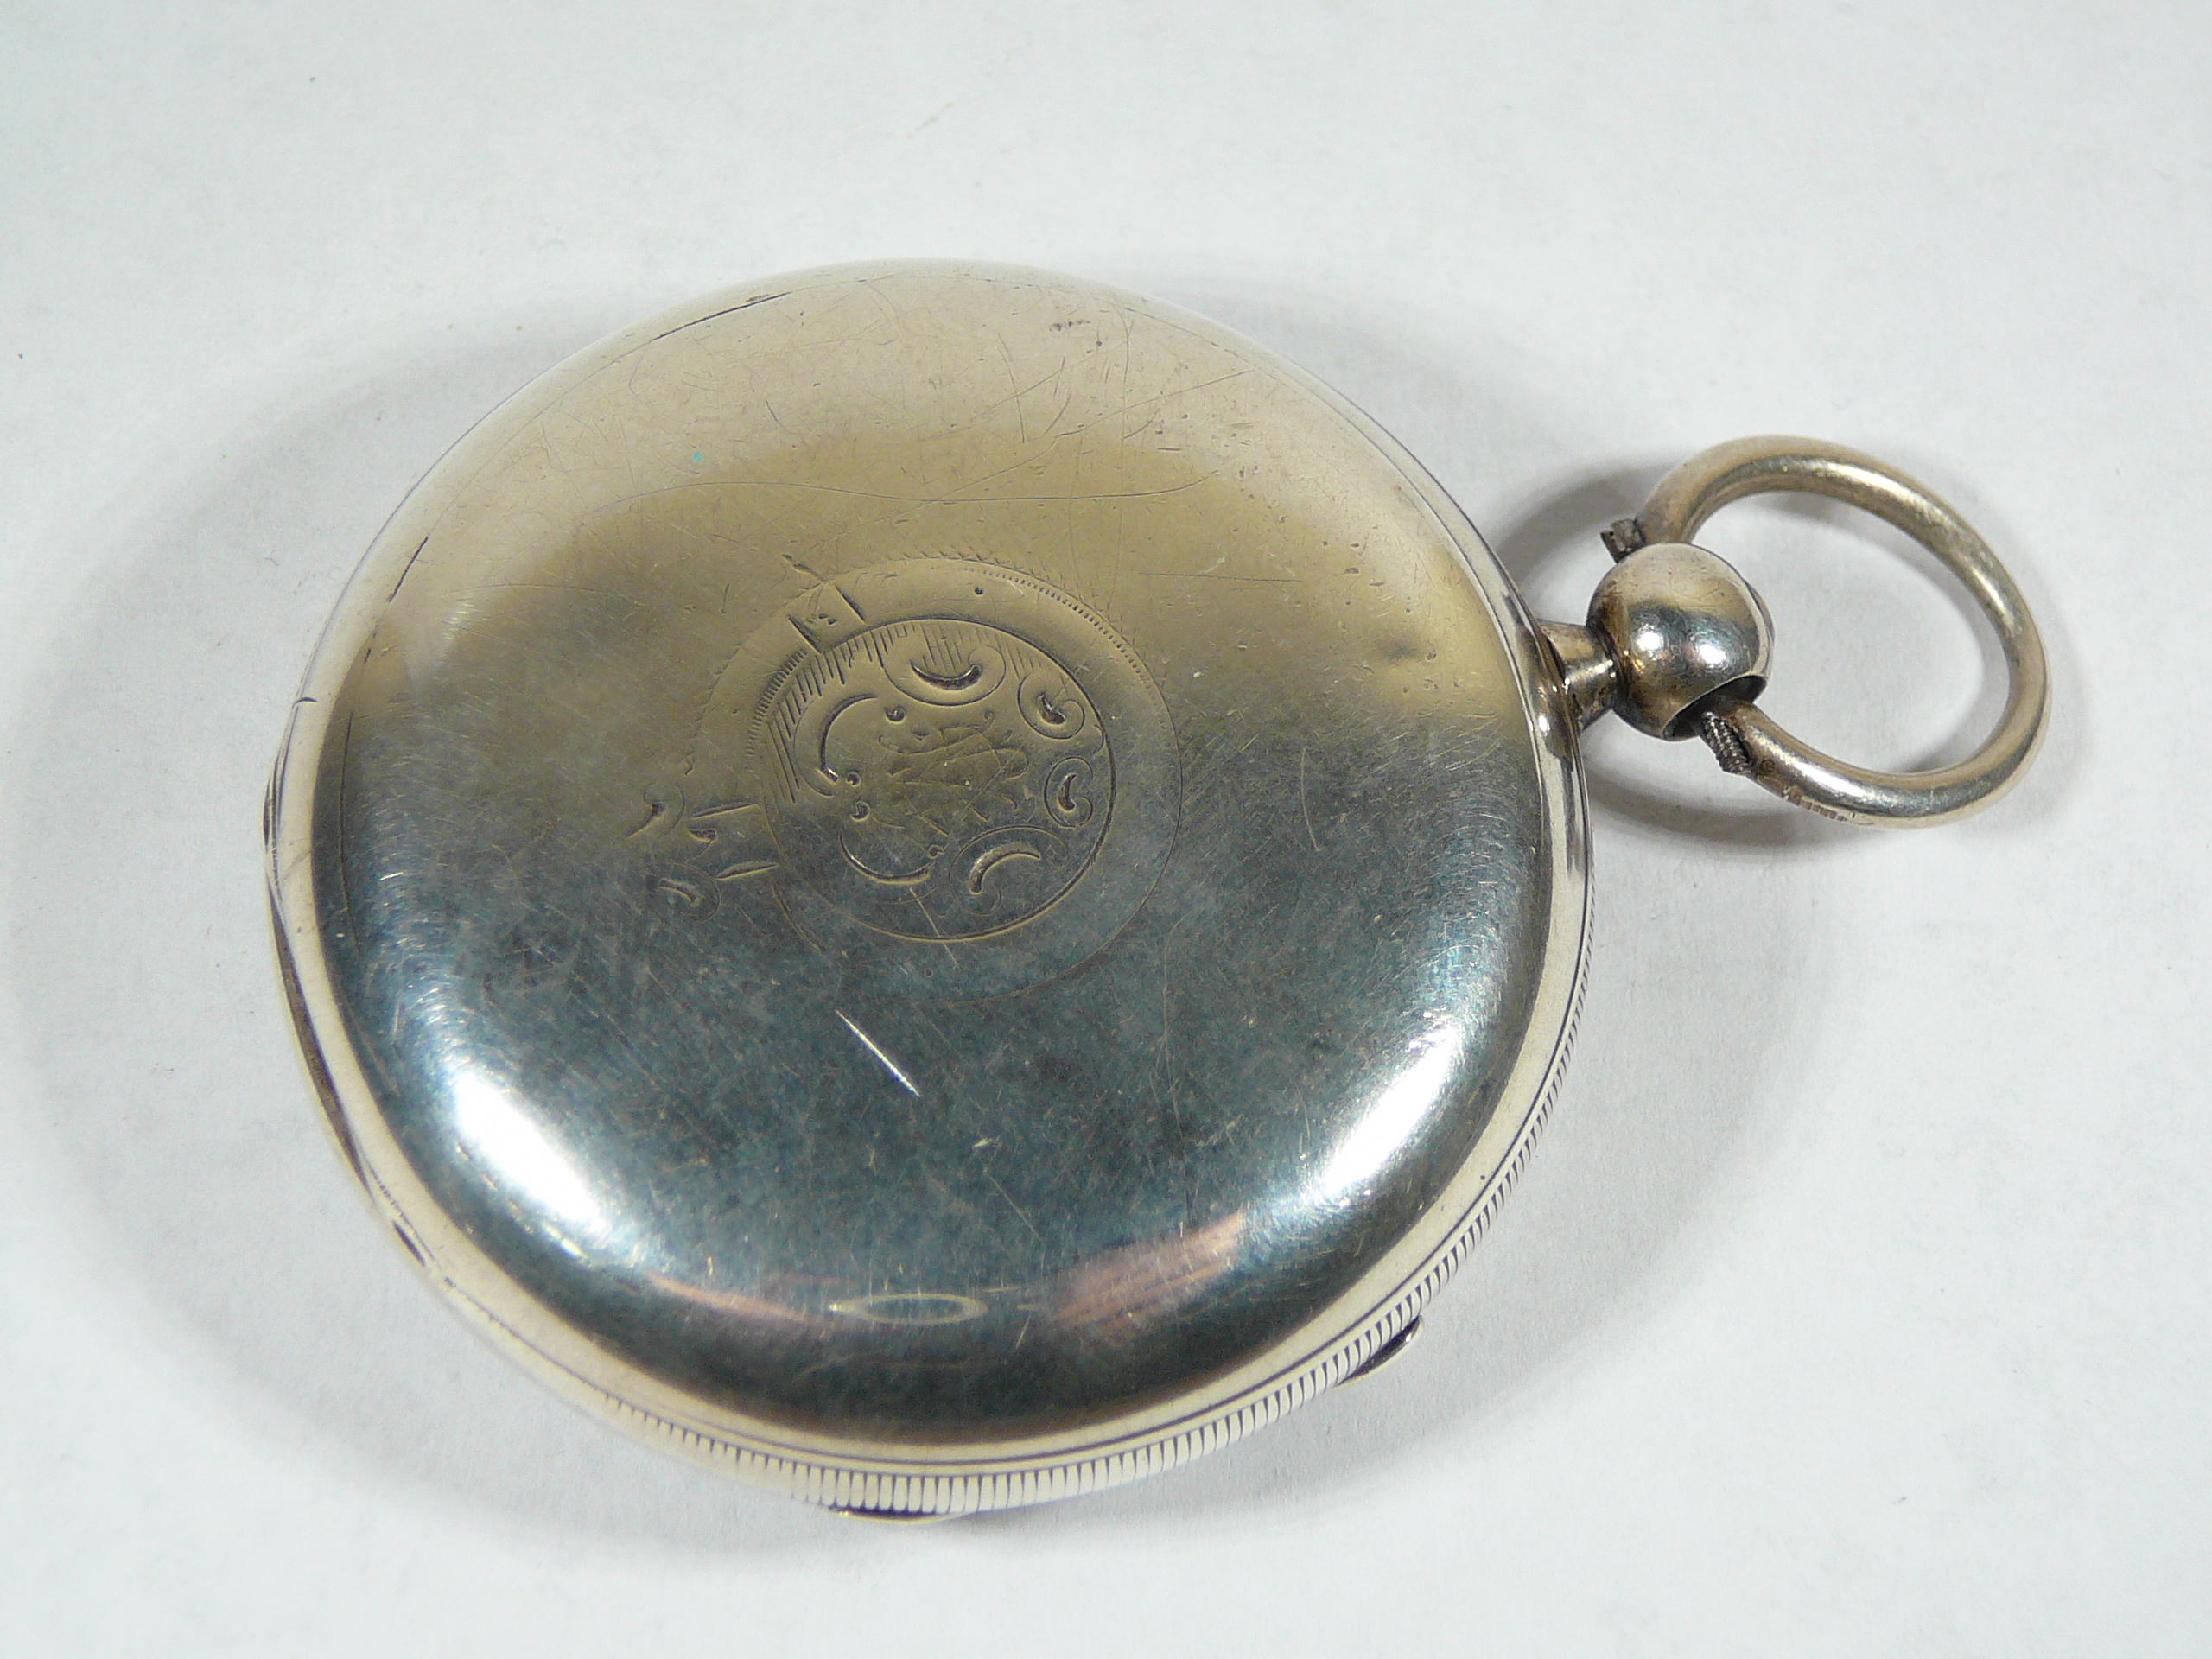 Gents Antique Silver Pocket Watch - Image 2 of 4